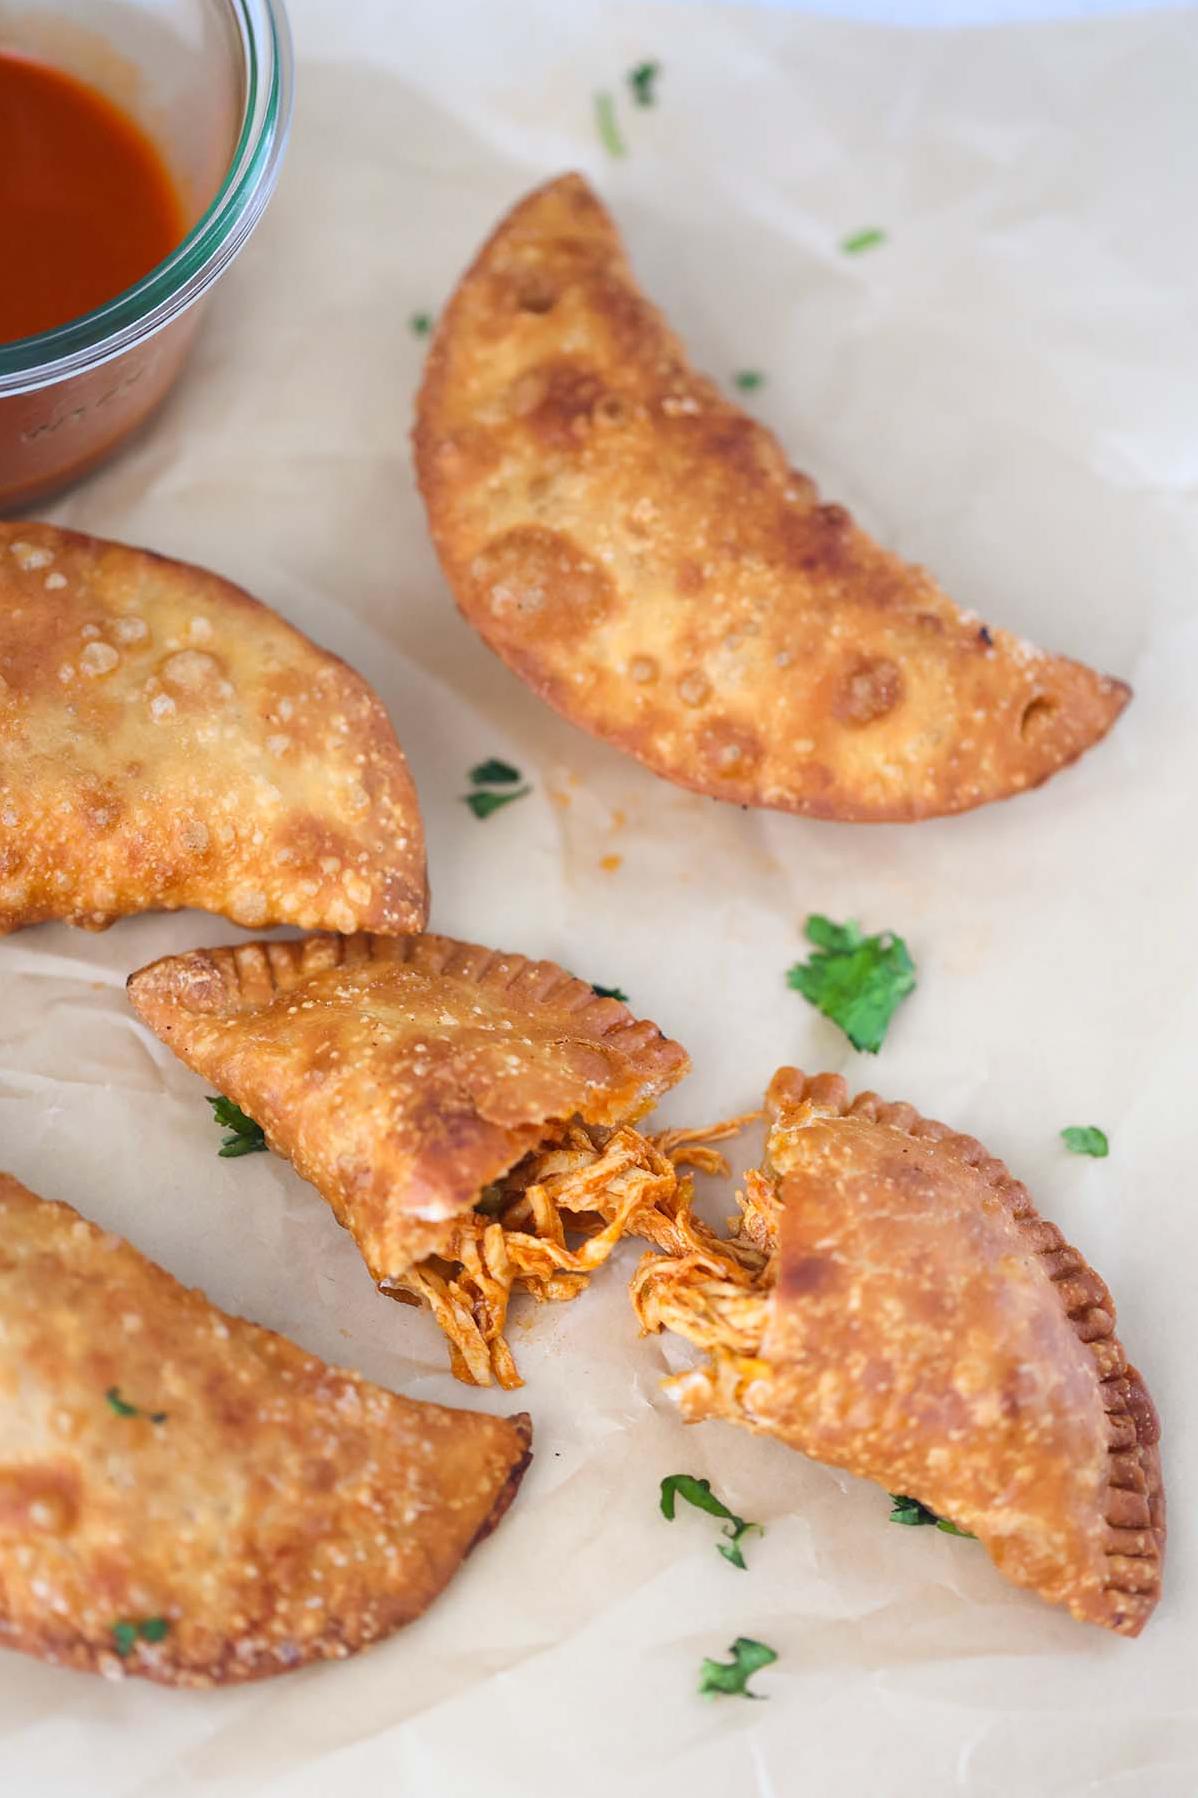  These empanadas are the perfect blend of American and Brazilian flavors.